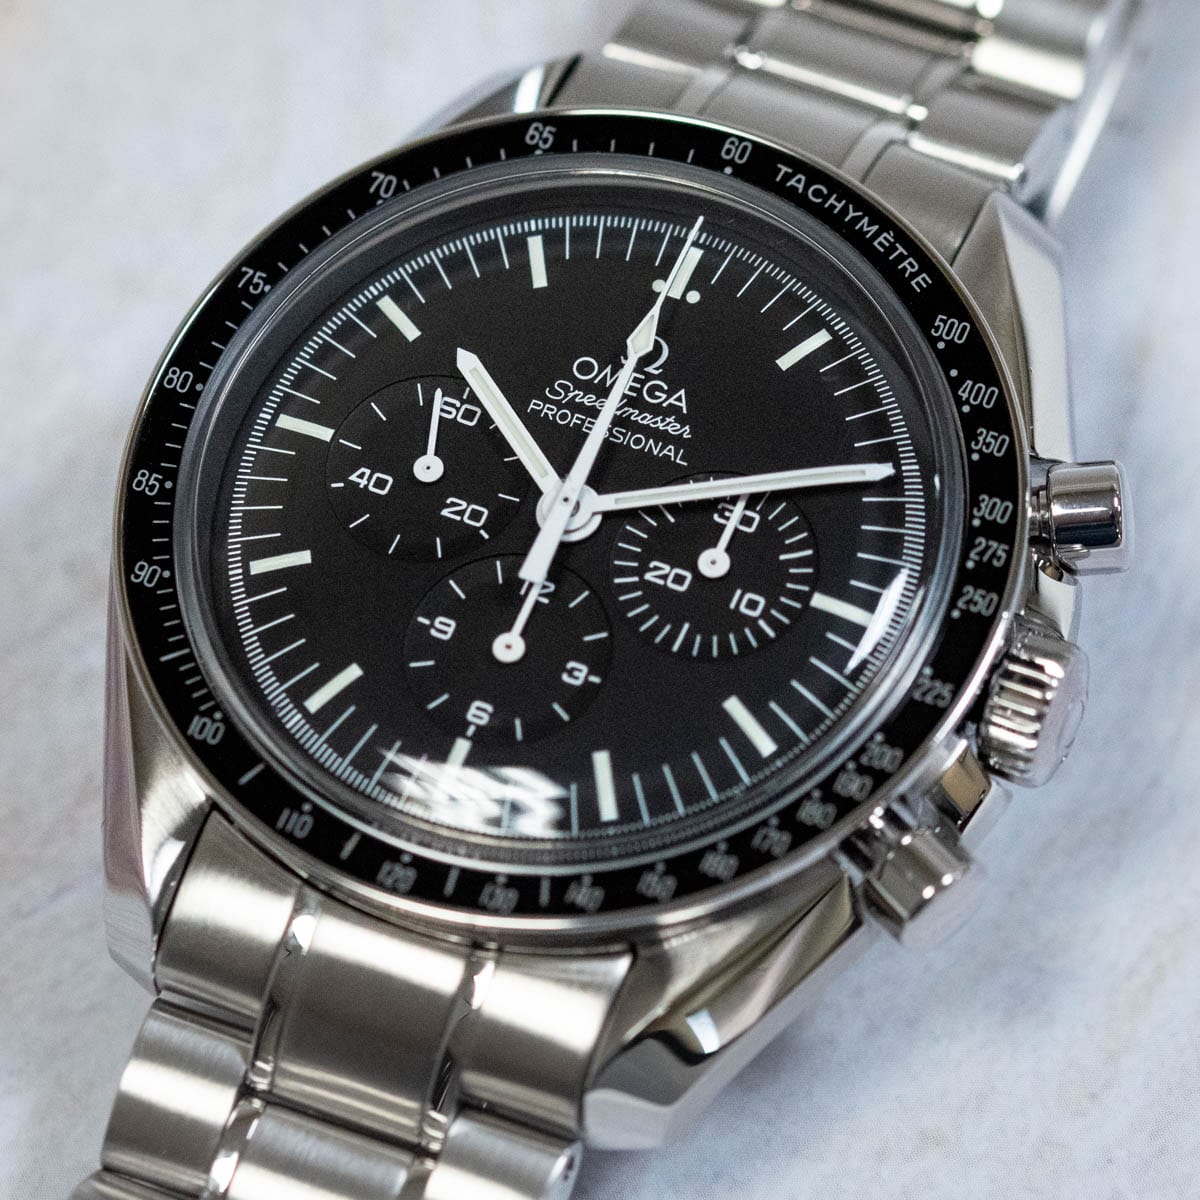 Stylied photo of  of Speedmaster Moonwatch